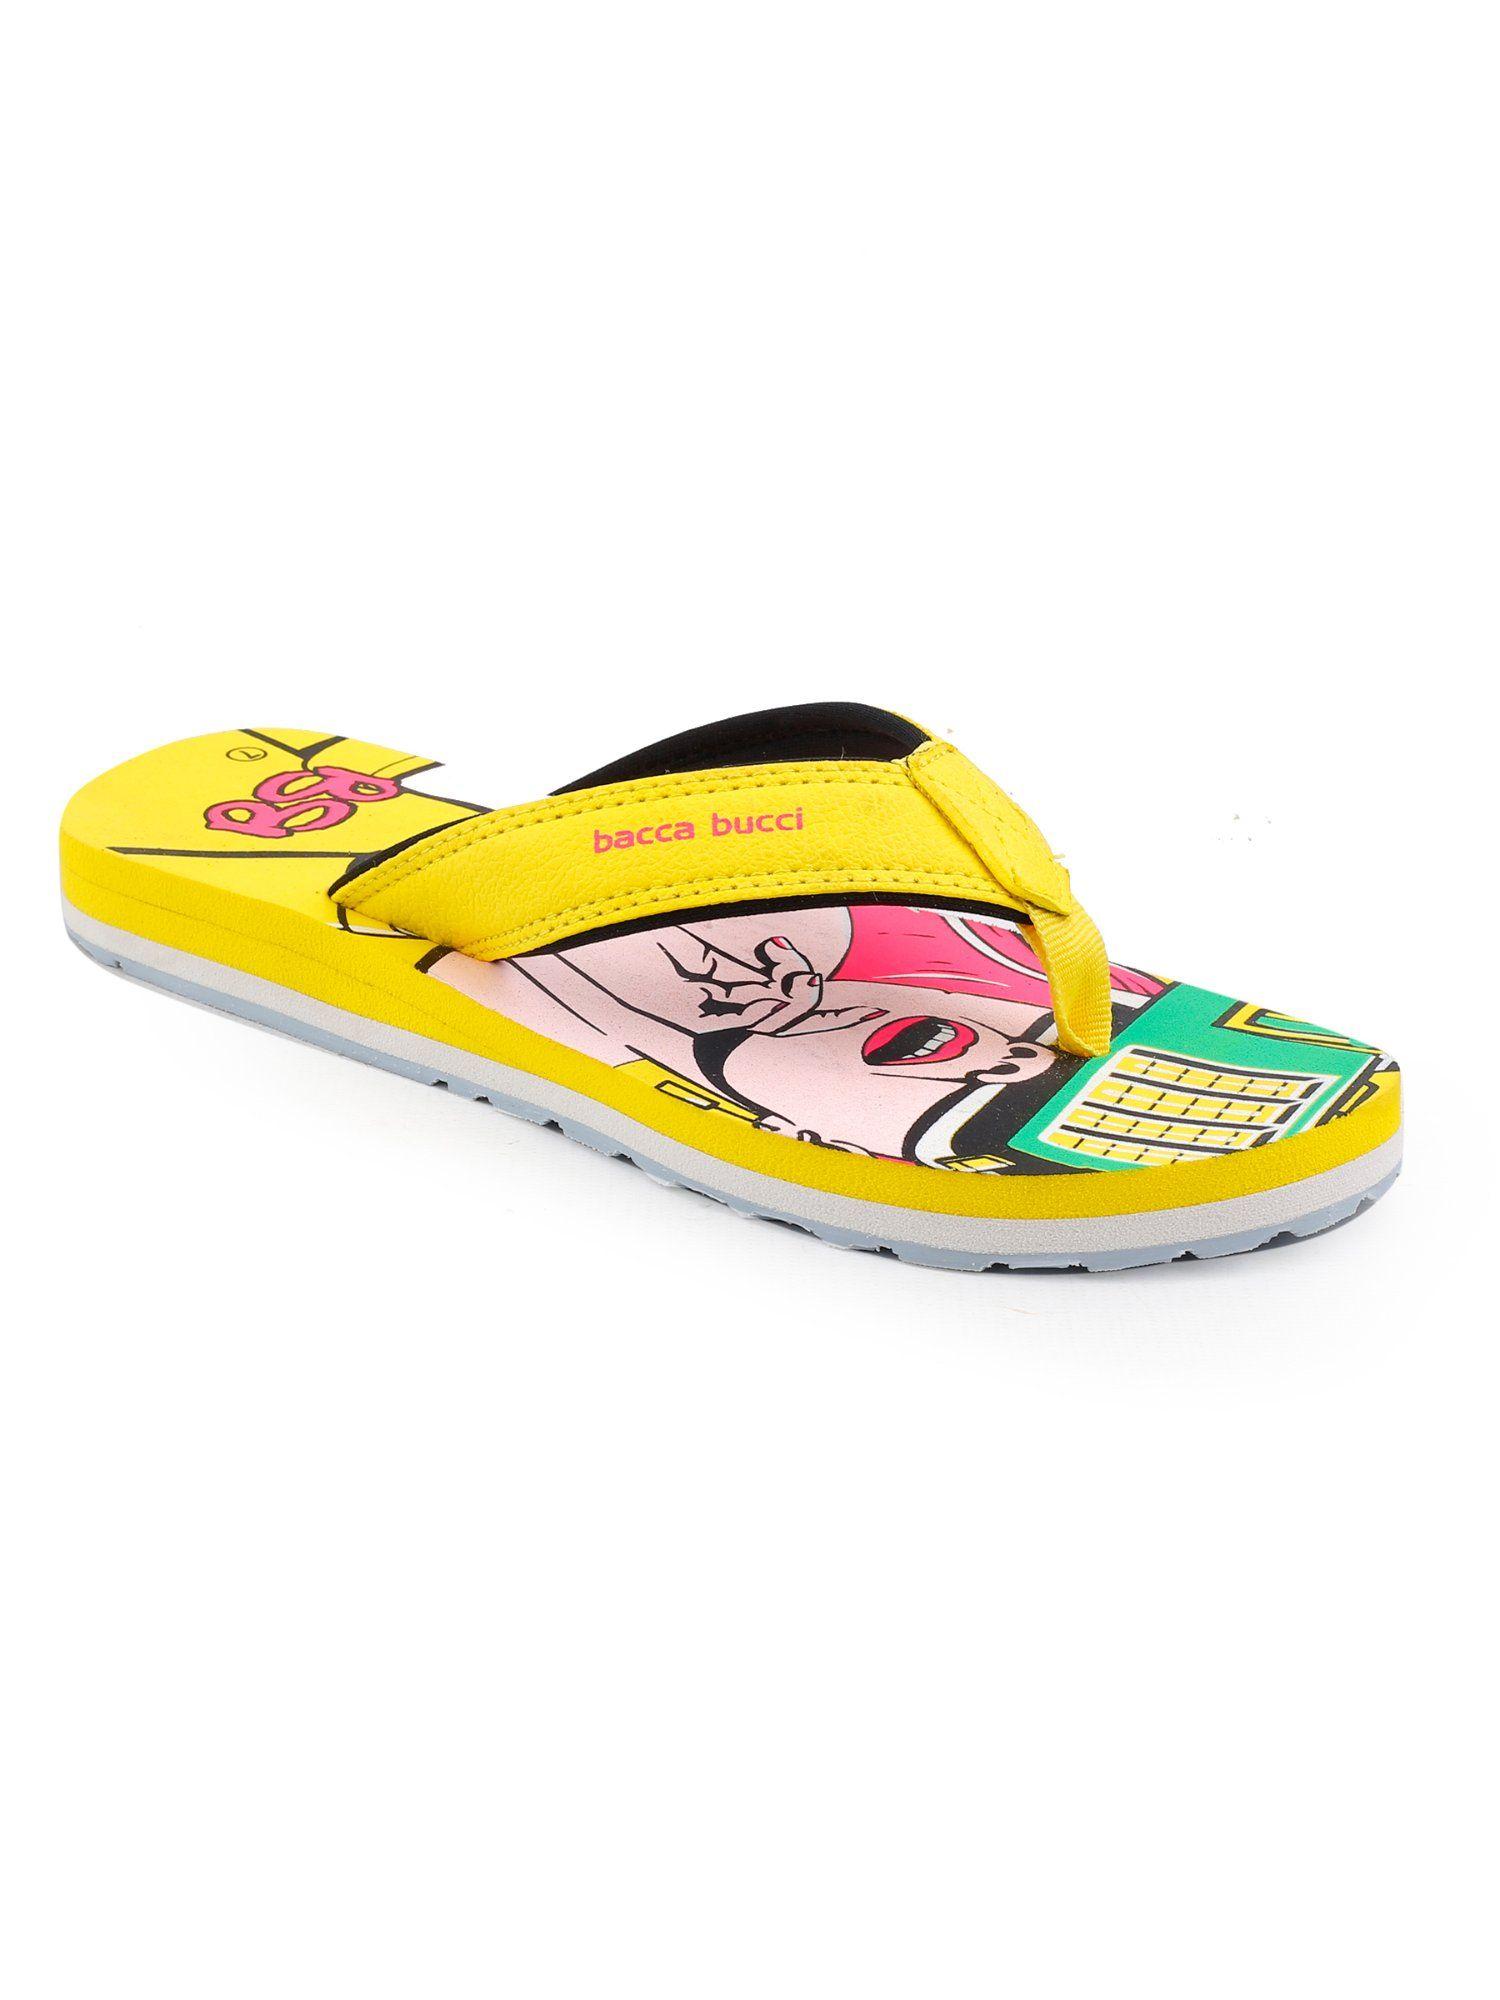 beach-breeze cloud flipflops with non-slip rubber outsole-yellow